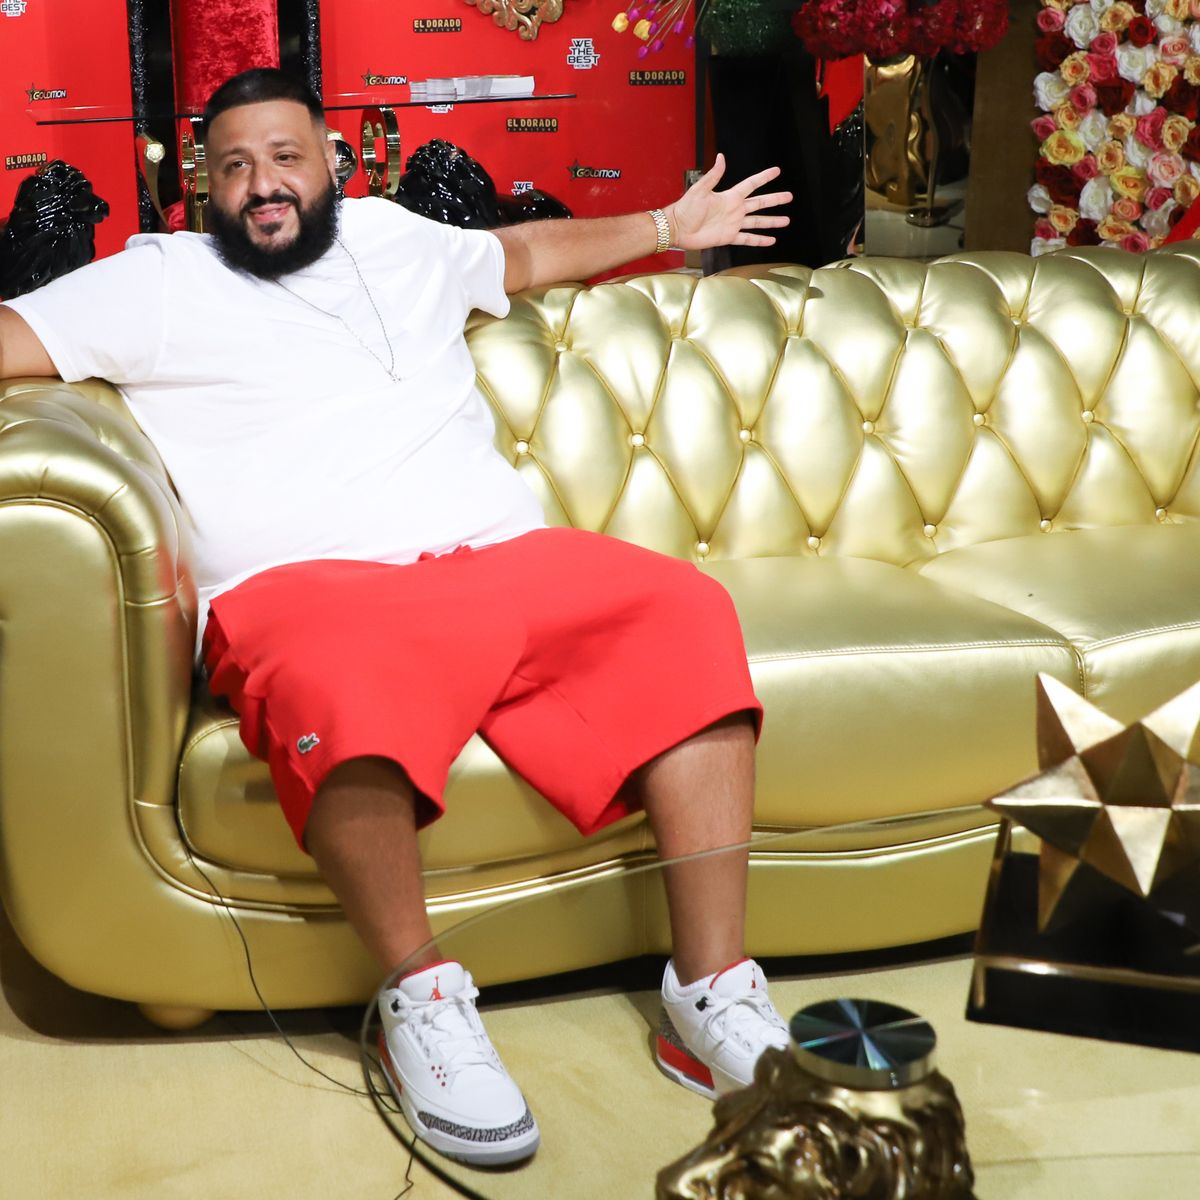 DJ Khaled Brought A LV Pillow To Protect His Shoes From The